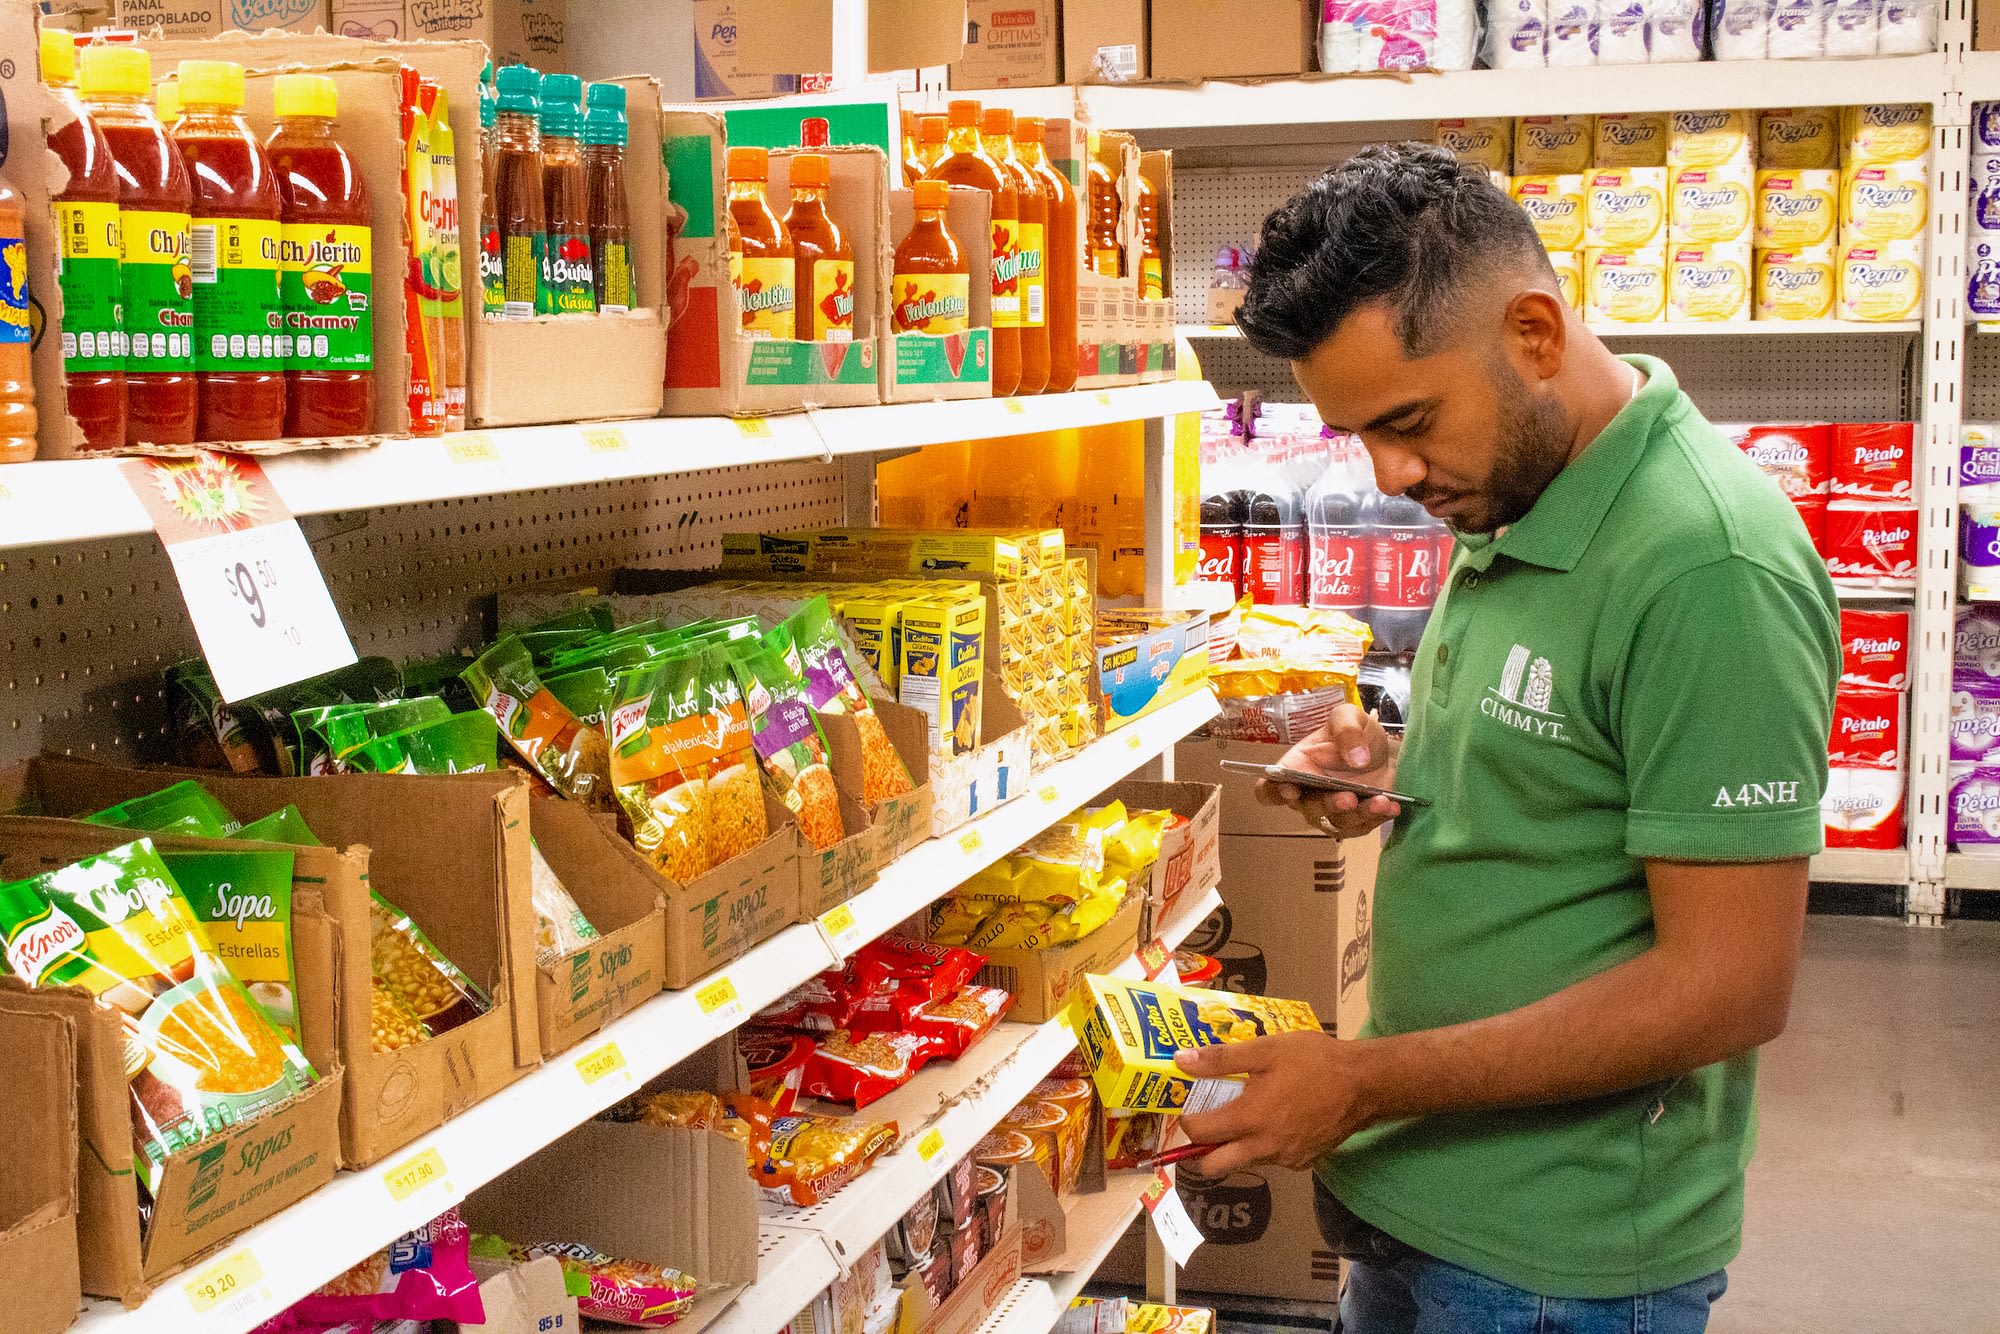 In a small supermarket in San Vicente, the research team found nearly 50 different types of biscuits and around 80 savory maize-based snacks like chips and tortillas. (Photo: Emma Orchardson/CIMMYT)